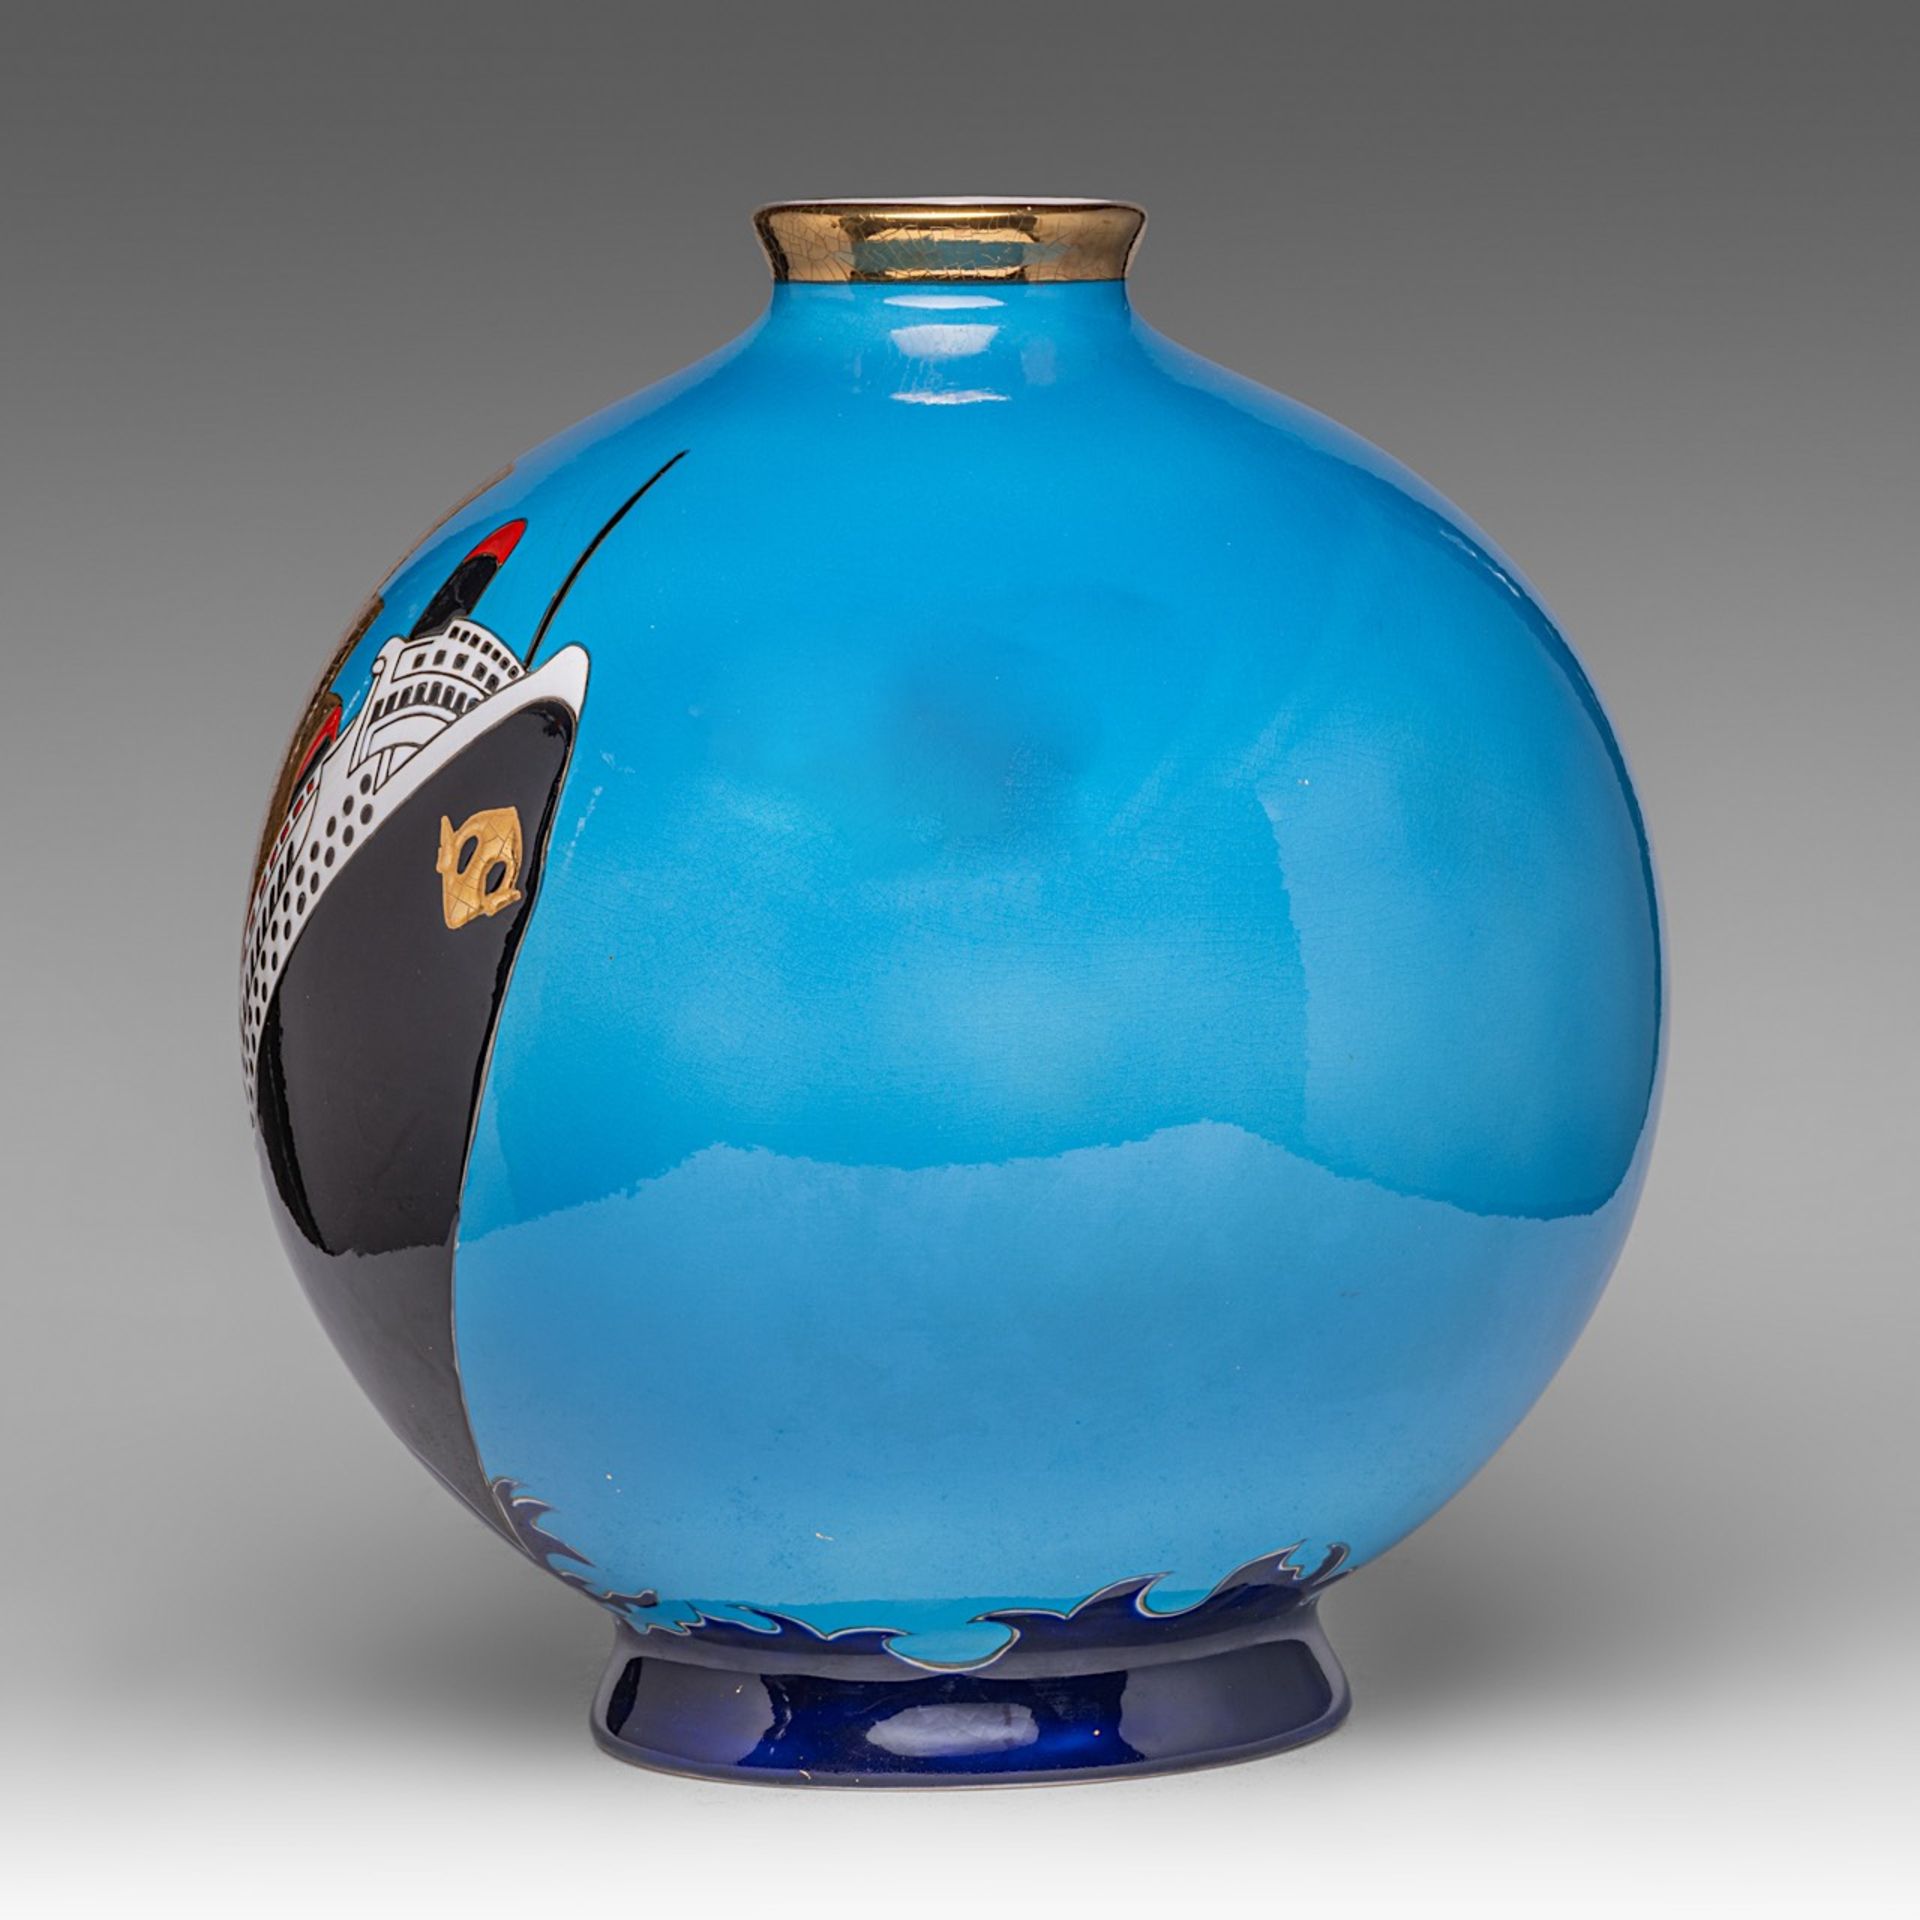 A large 'New York' circular vase by Longwy, limited edition, Ndeg 29/50, H 40 cm - Image 2 of 7